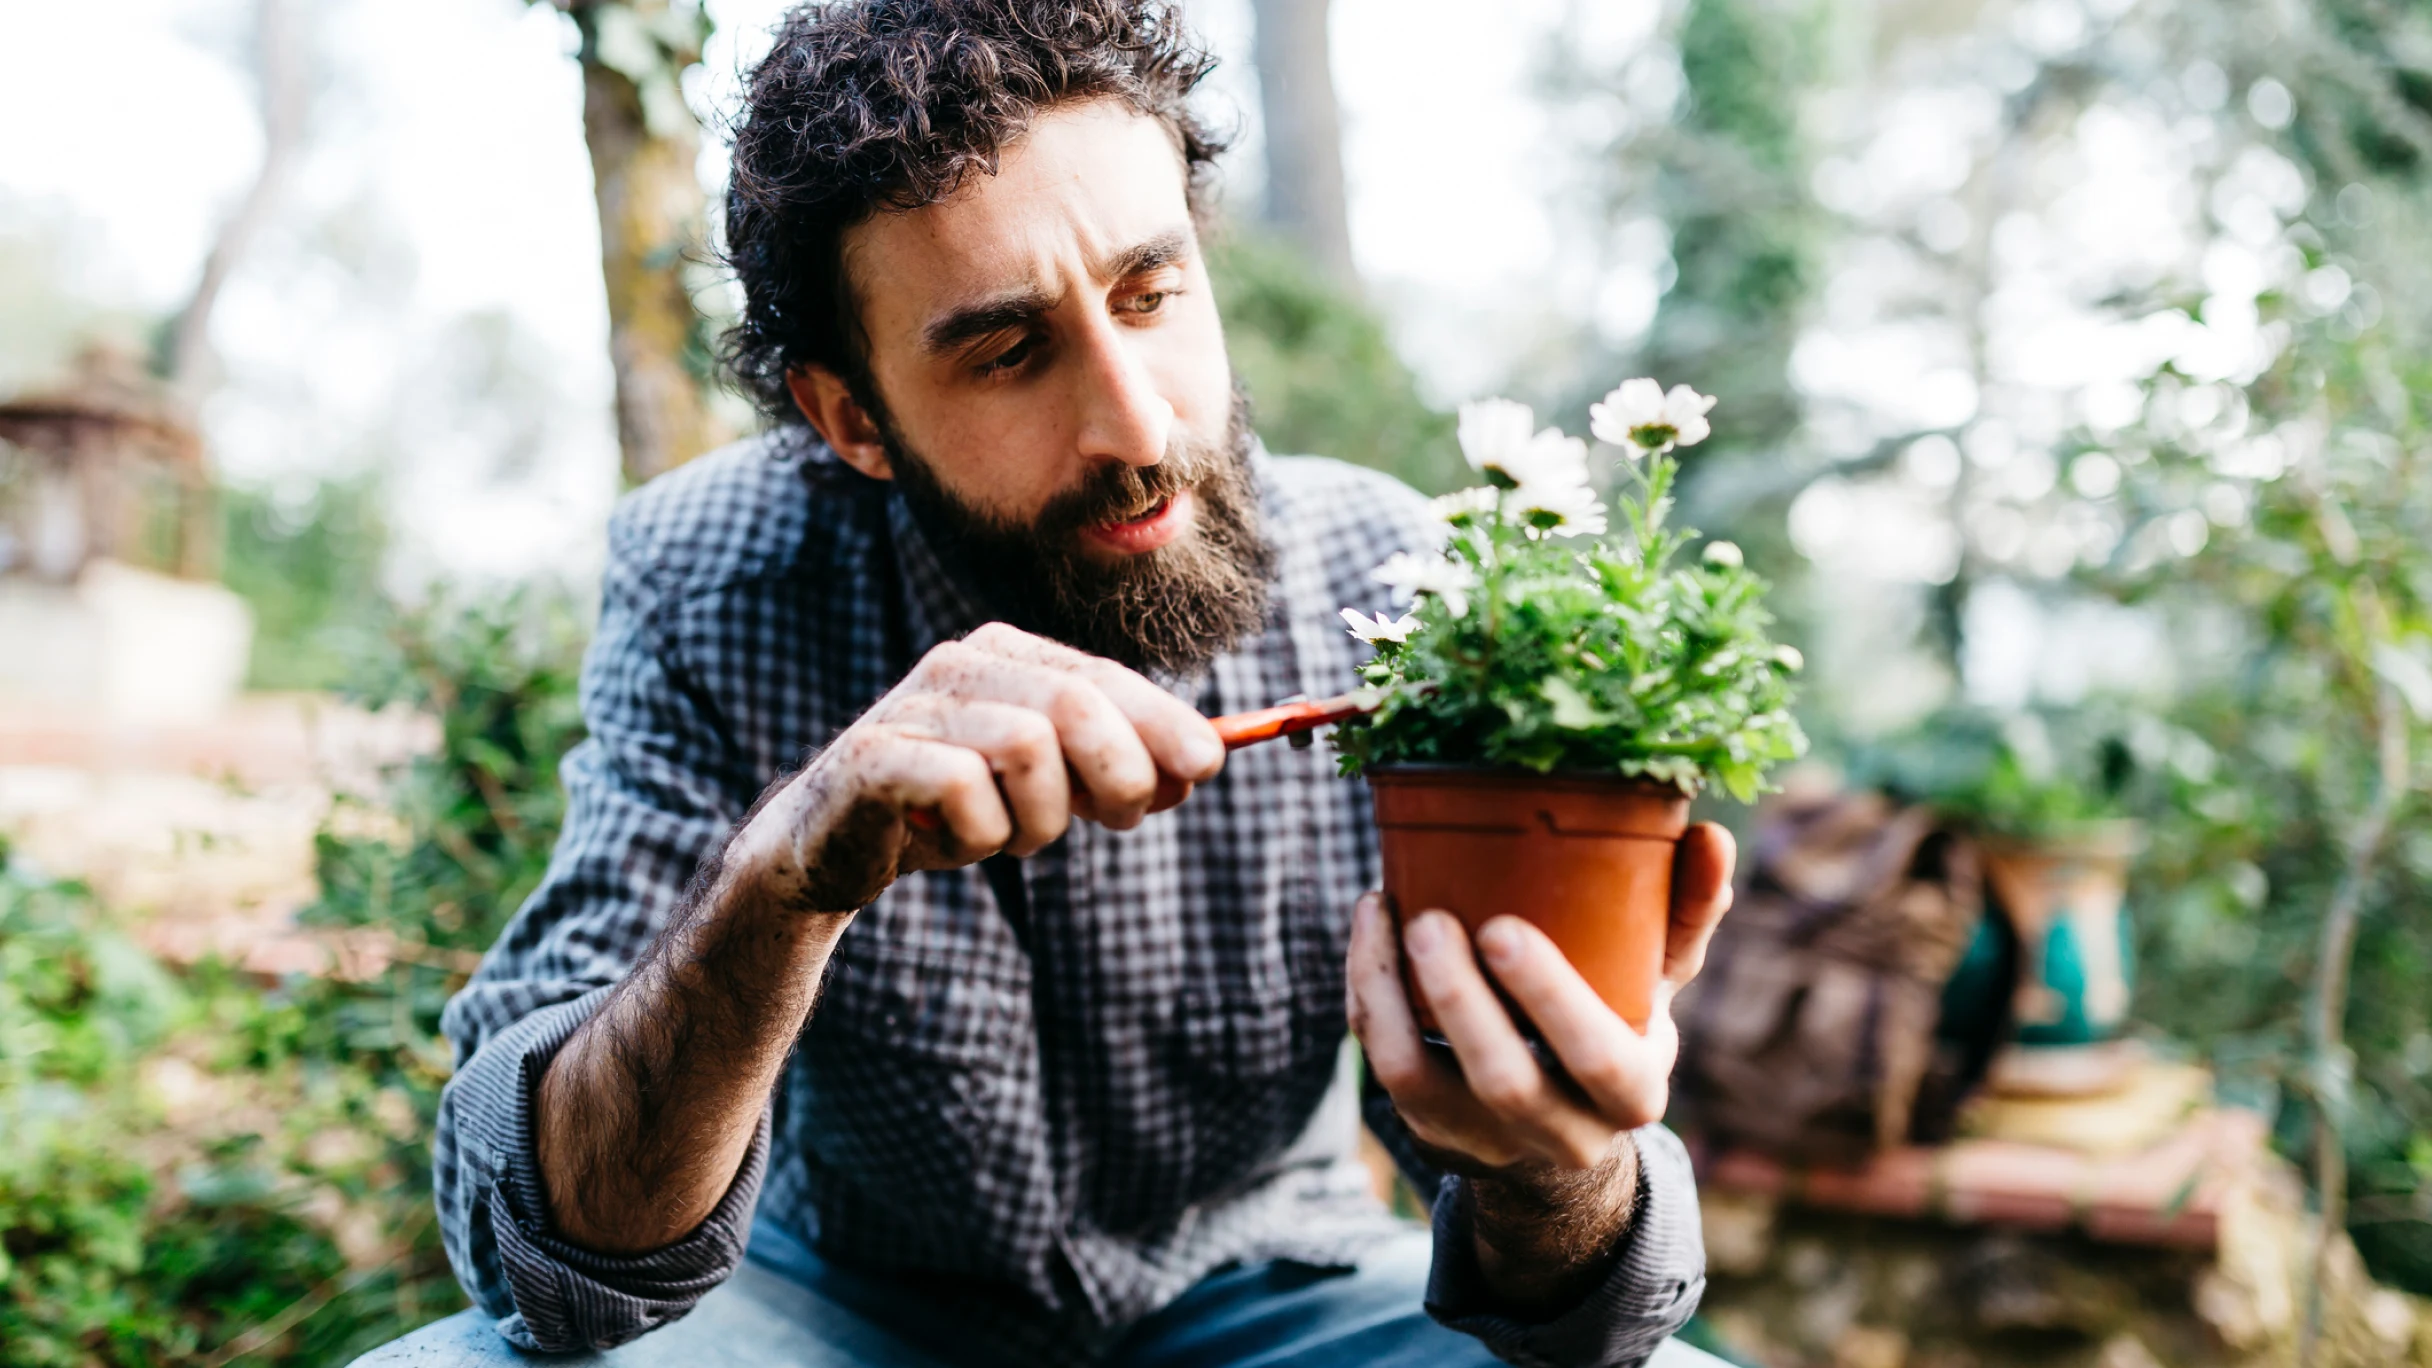 A bearded white man pruning for a potted plant in an outdoor garden.